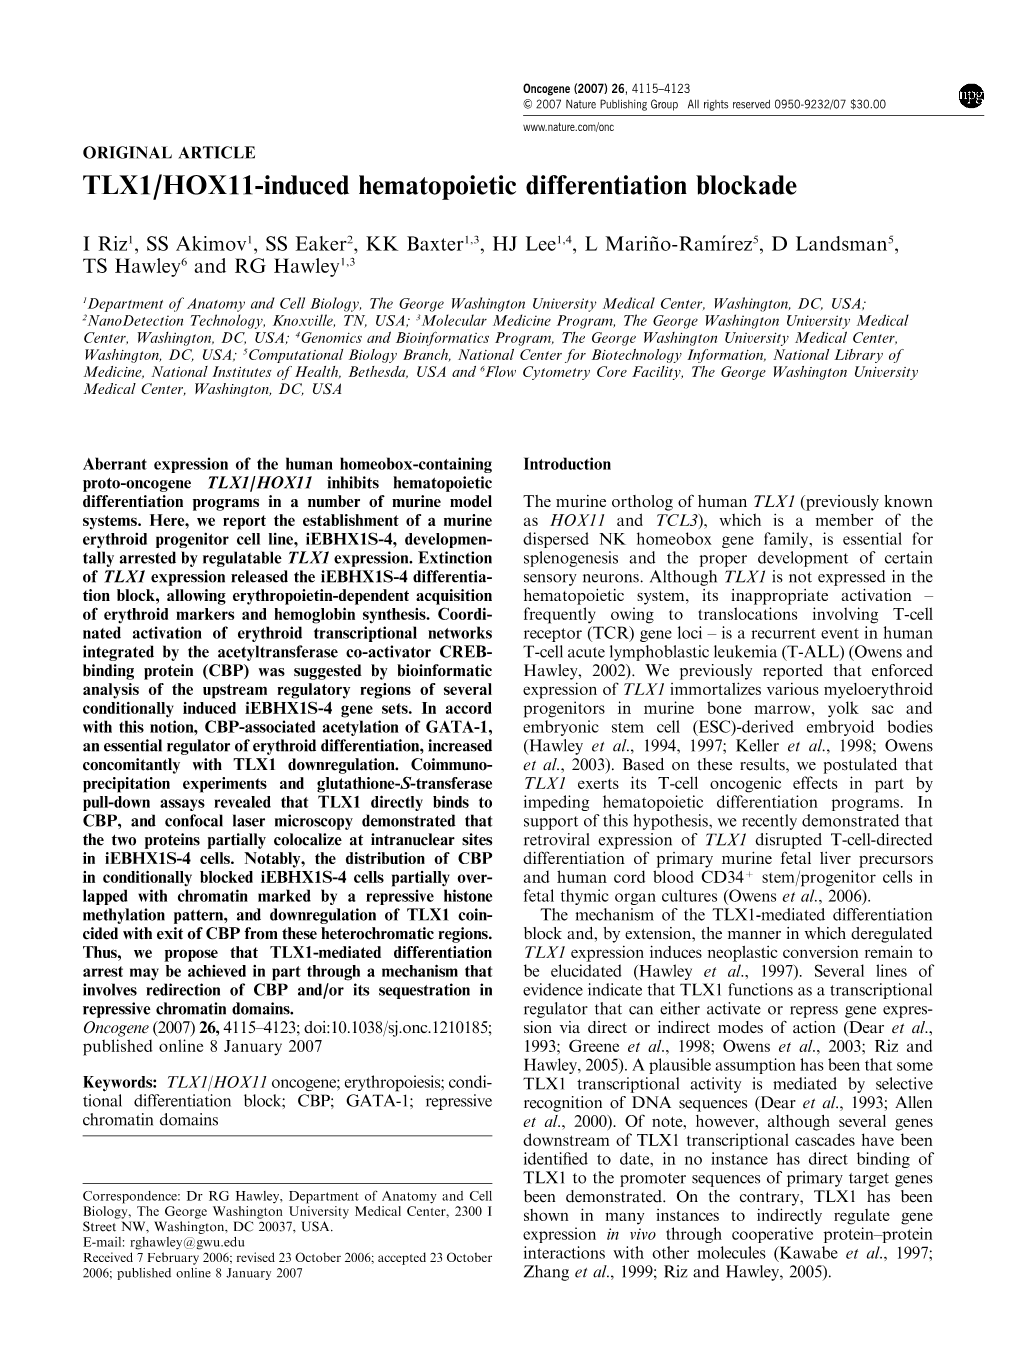 TLX1/HOX11-Induced Hematopoietic Differentiation Blockade